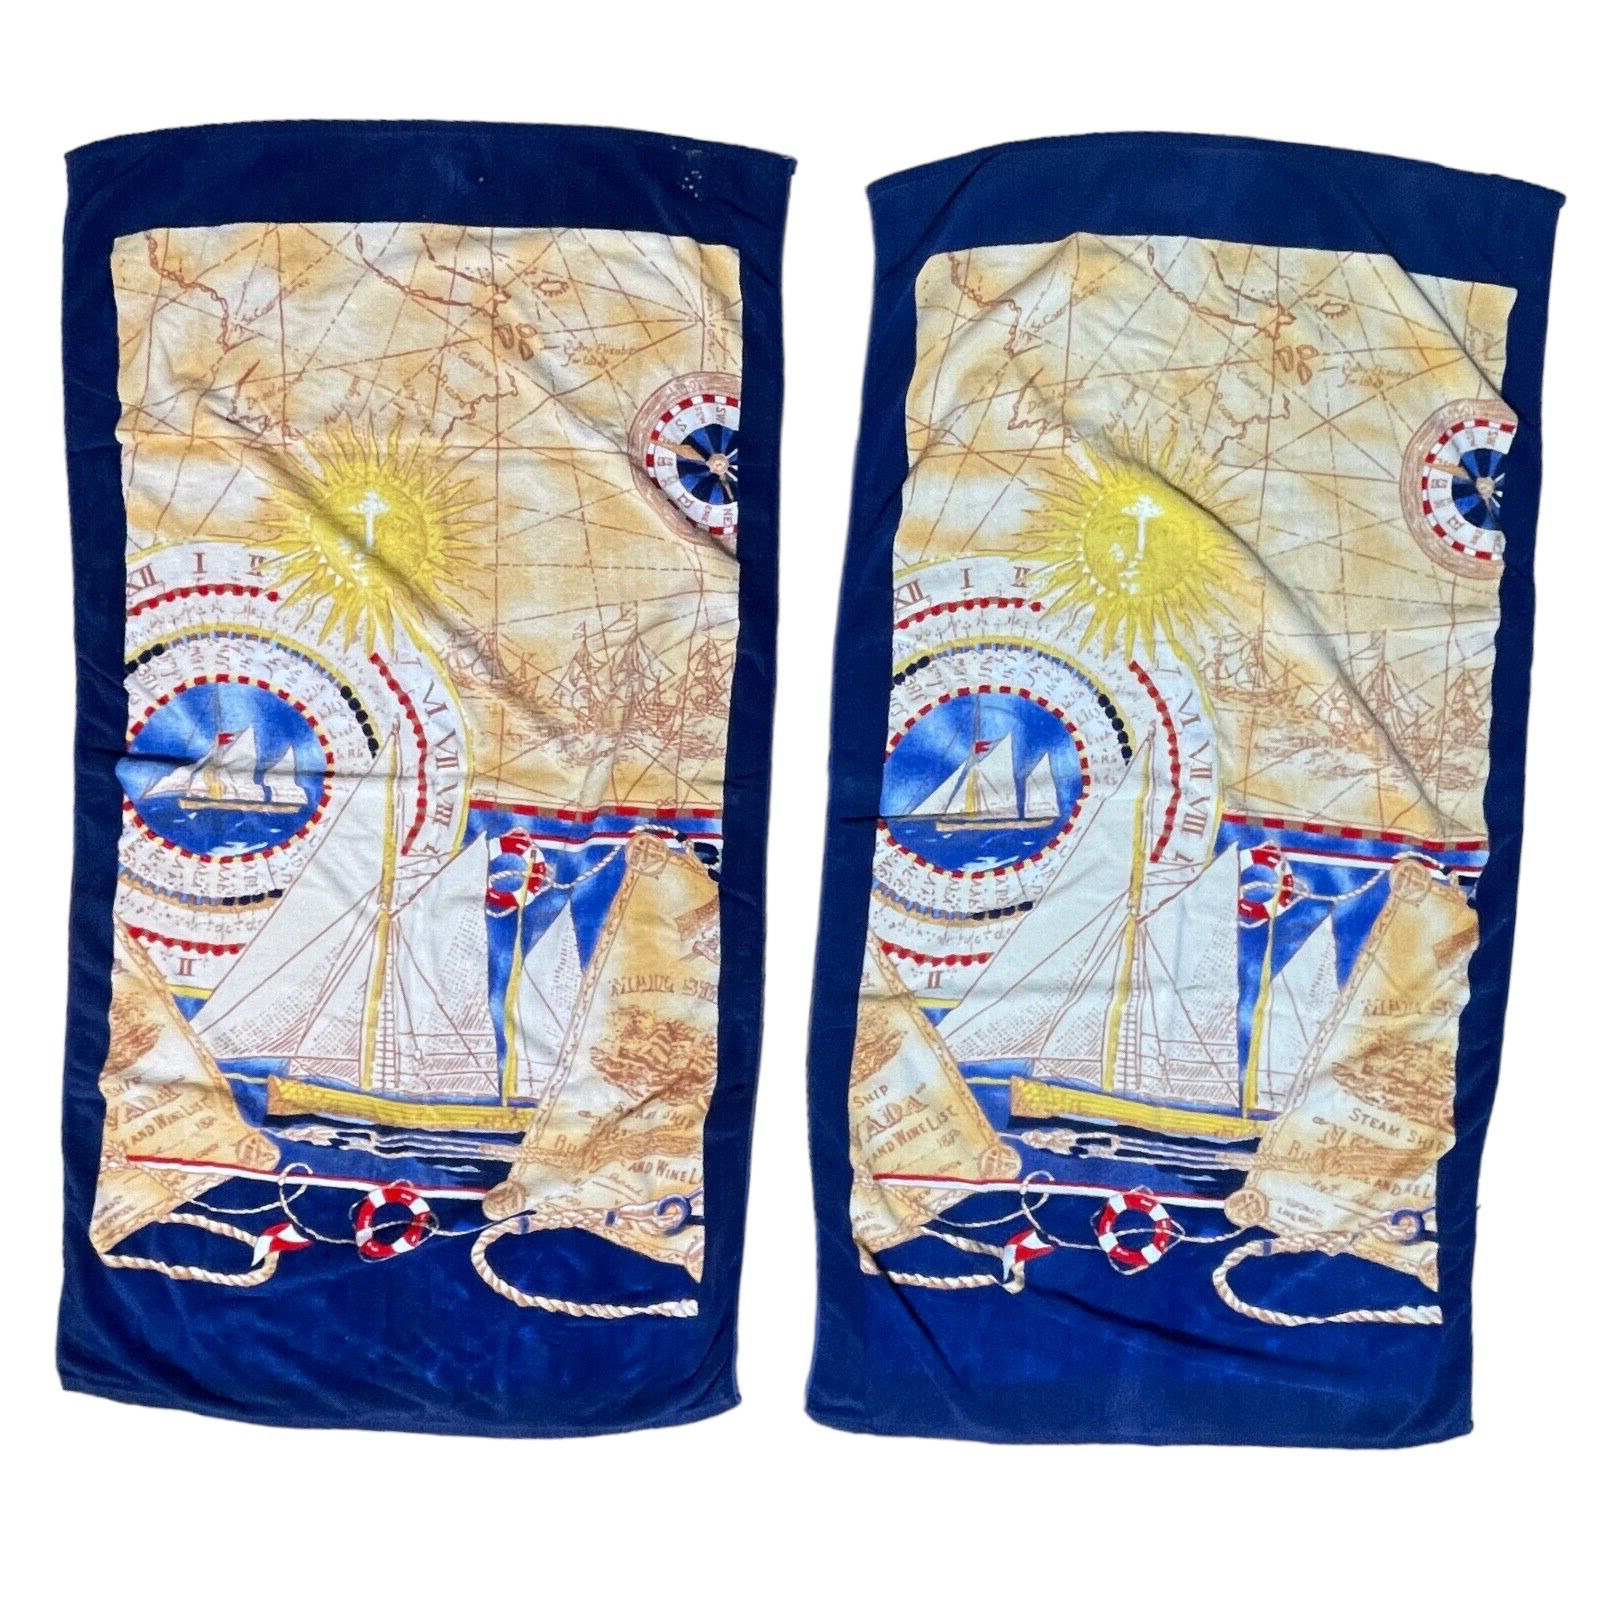 Leshner Beach Towel Sailboat Nautical Pair Vintage - Some Damage See Pictures